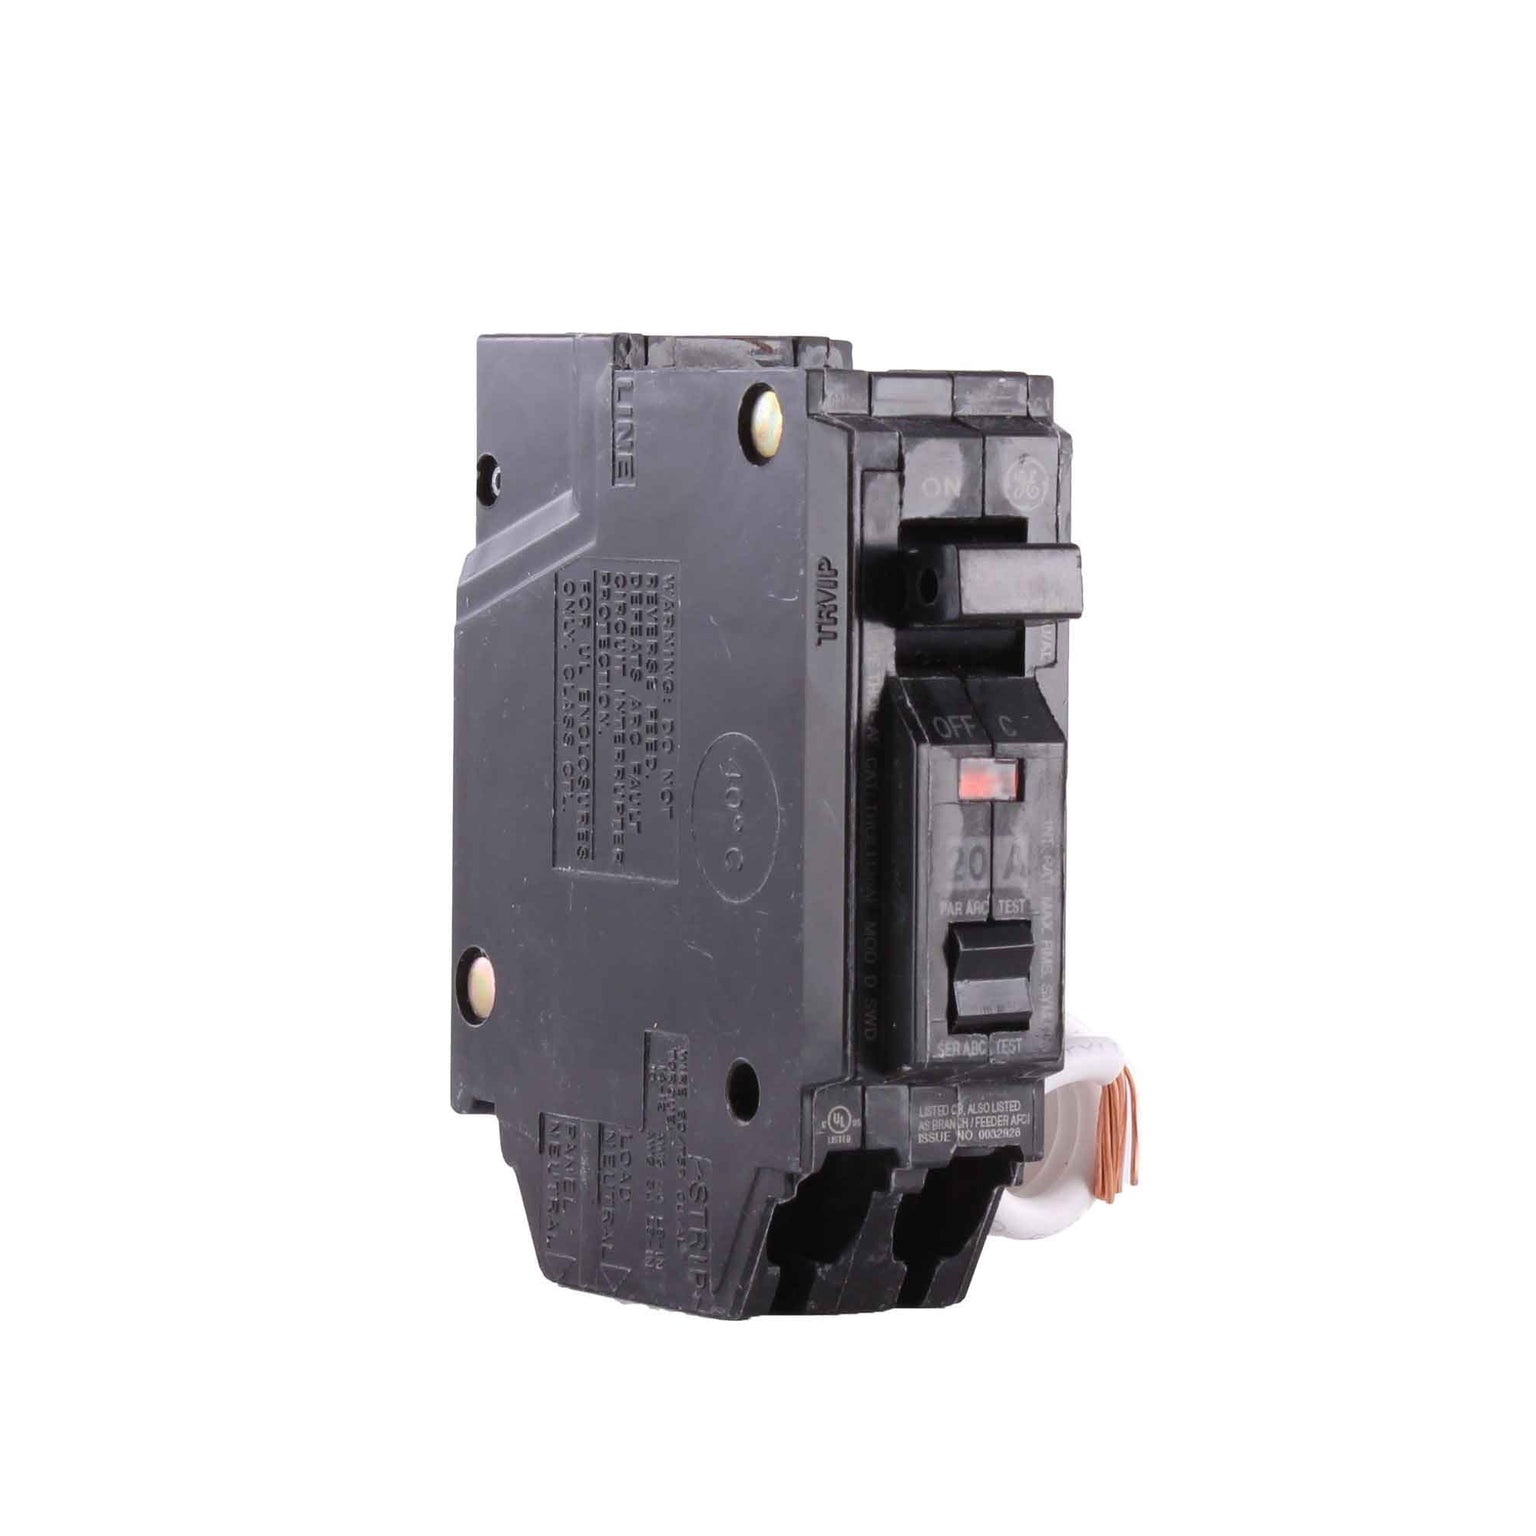 THQL1120AF - General Electrics - Molded Case Circuit Breakers